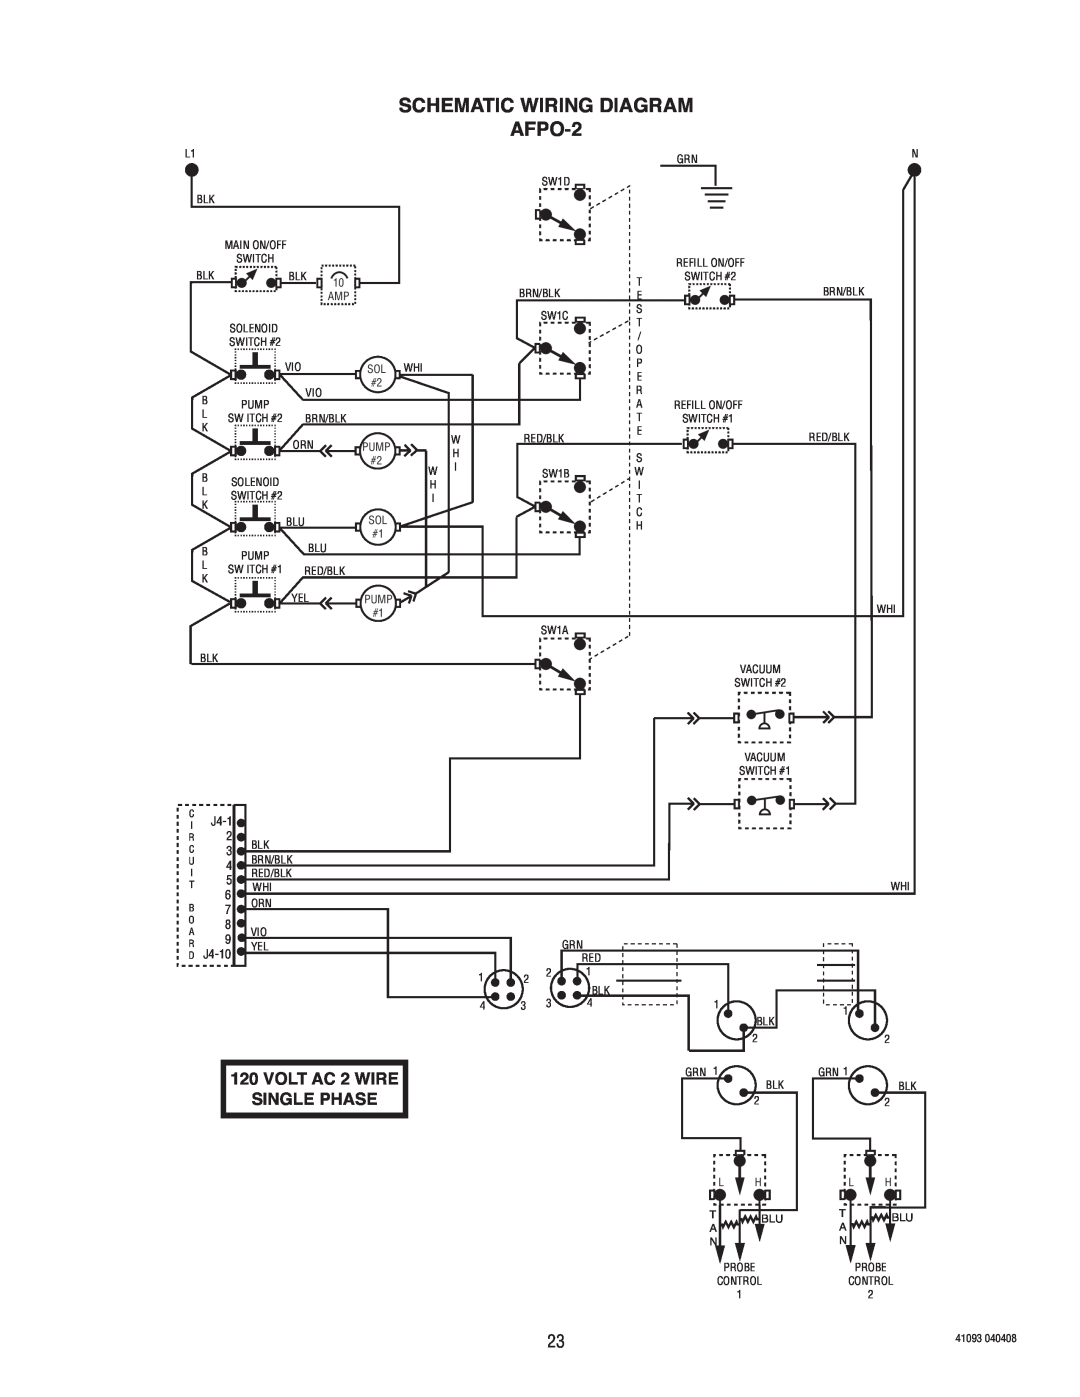 Bunn AFPO-3 SL manual SCHEMATIC WIRING DIAGRAM AFPO-2, VOLT AC 2 WIRE, Single Phase 